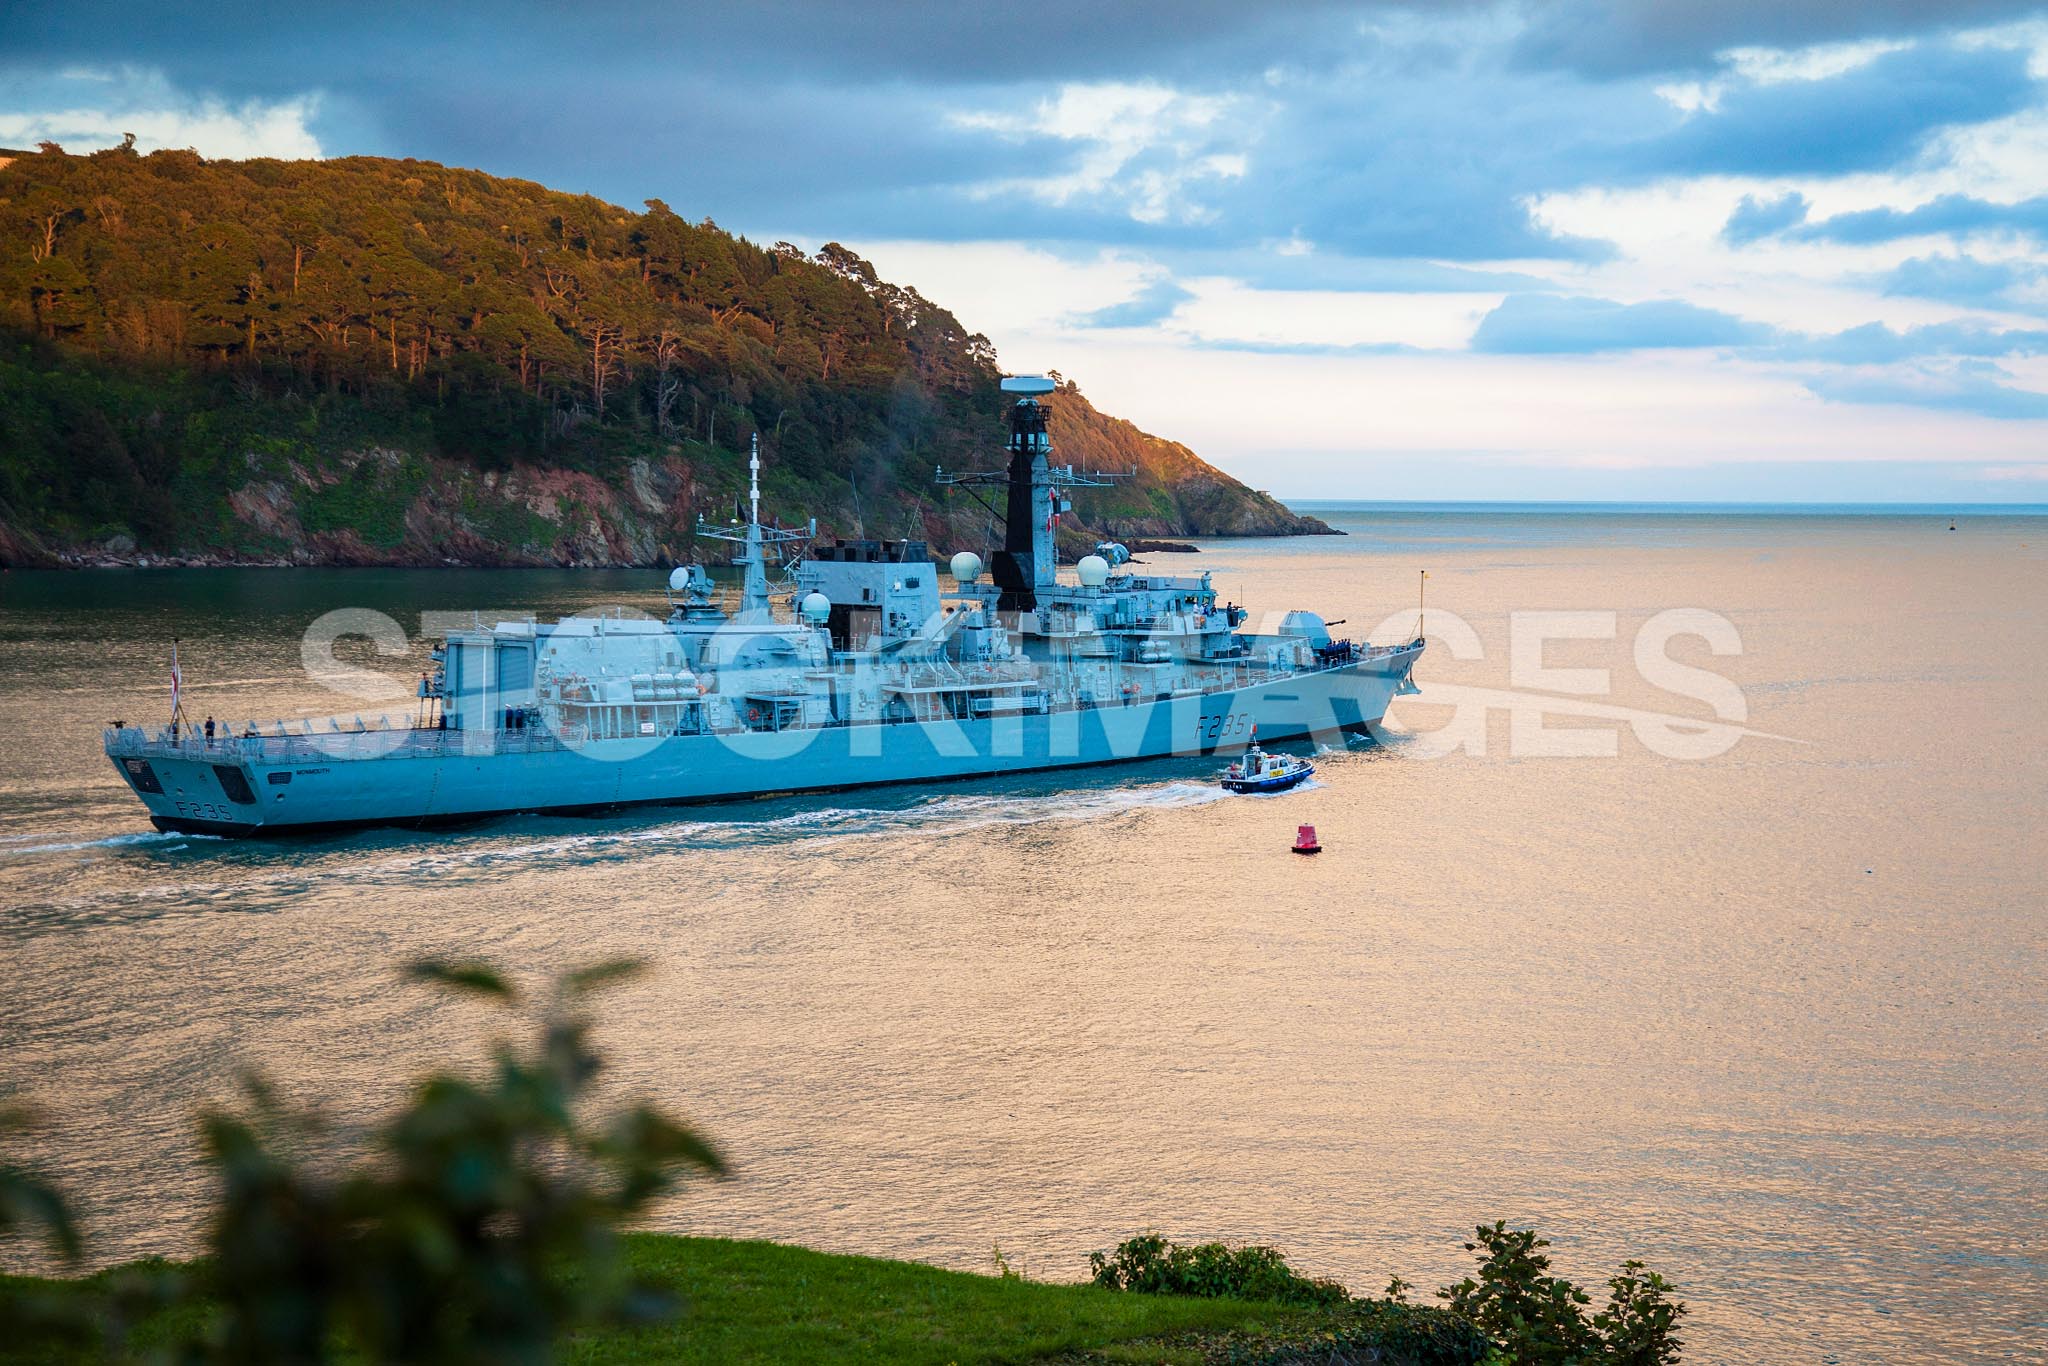 HMS Monmouth passes the Dartmouth Castle as she returns to sea.